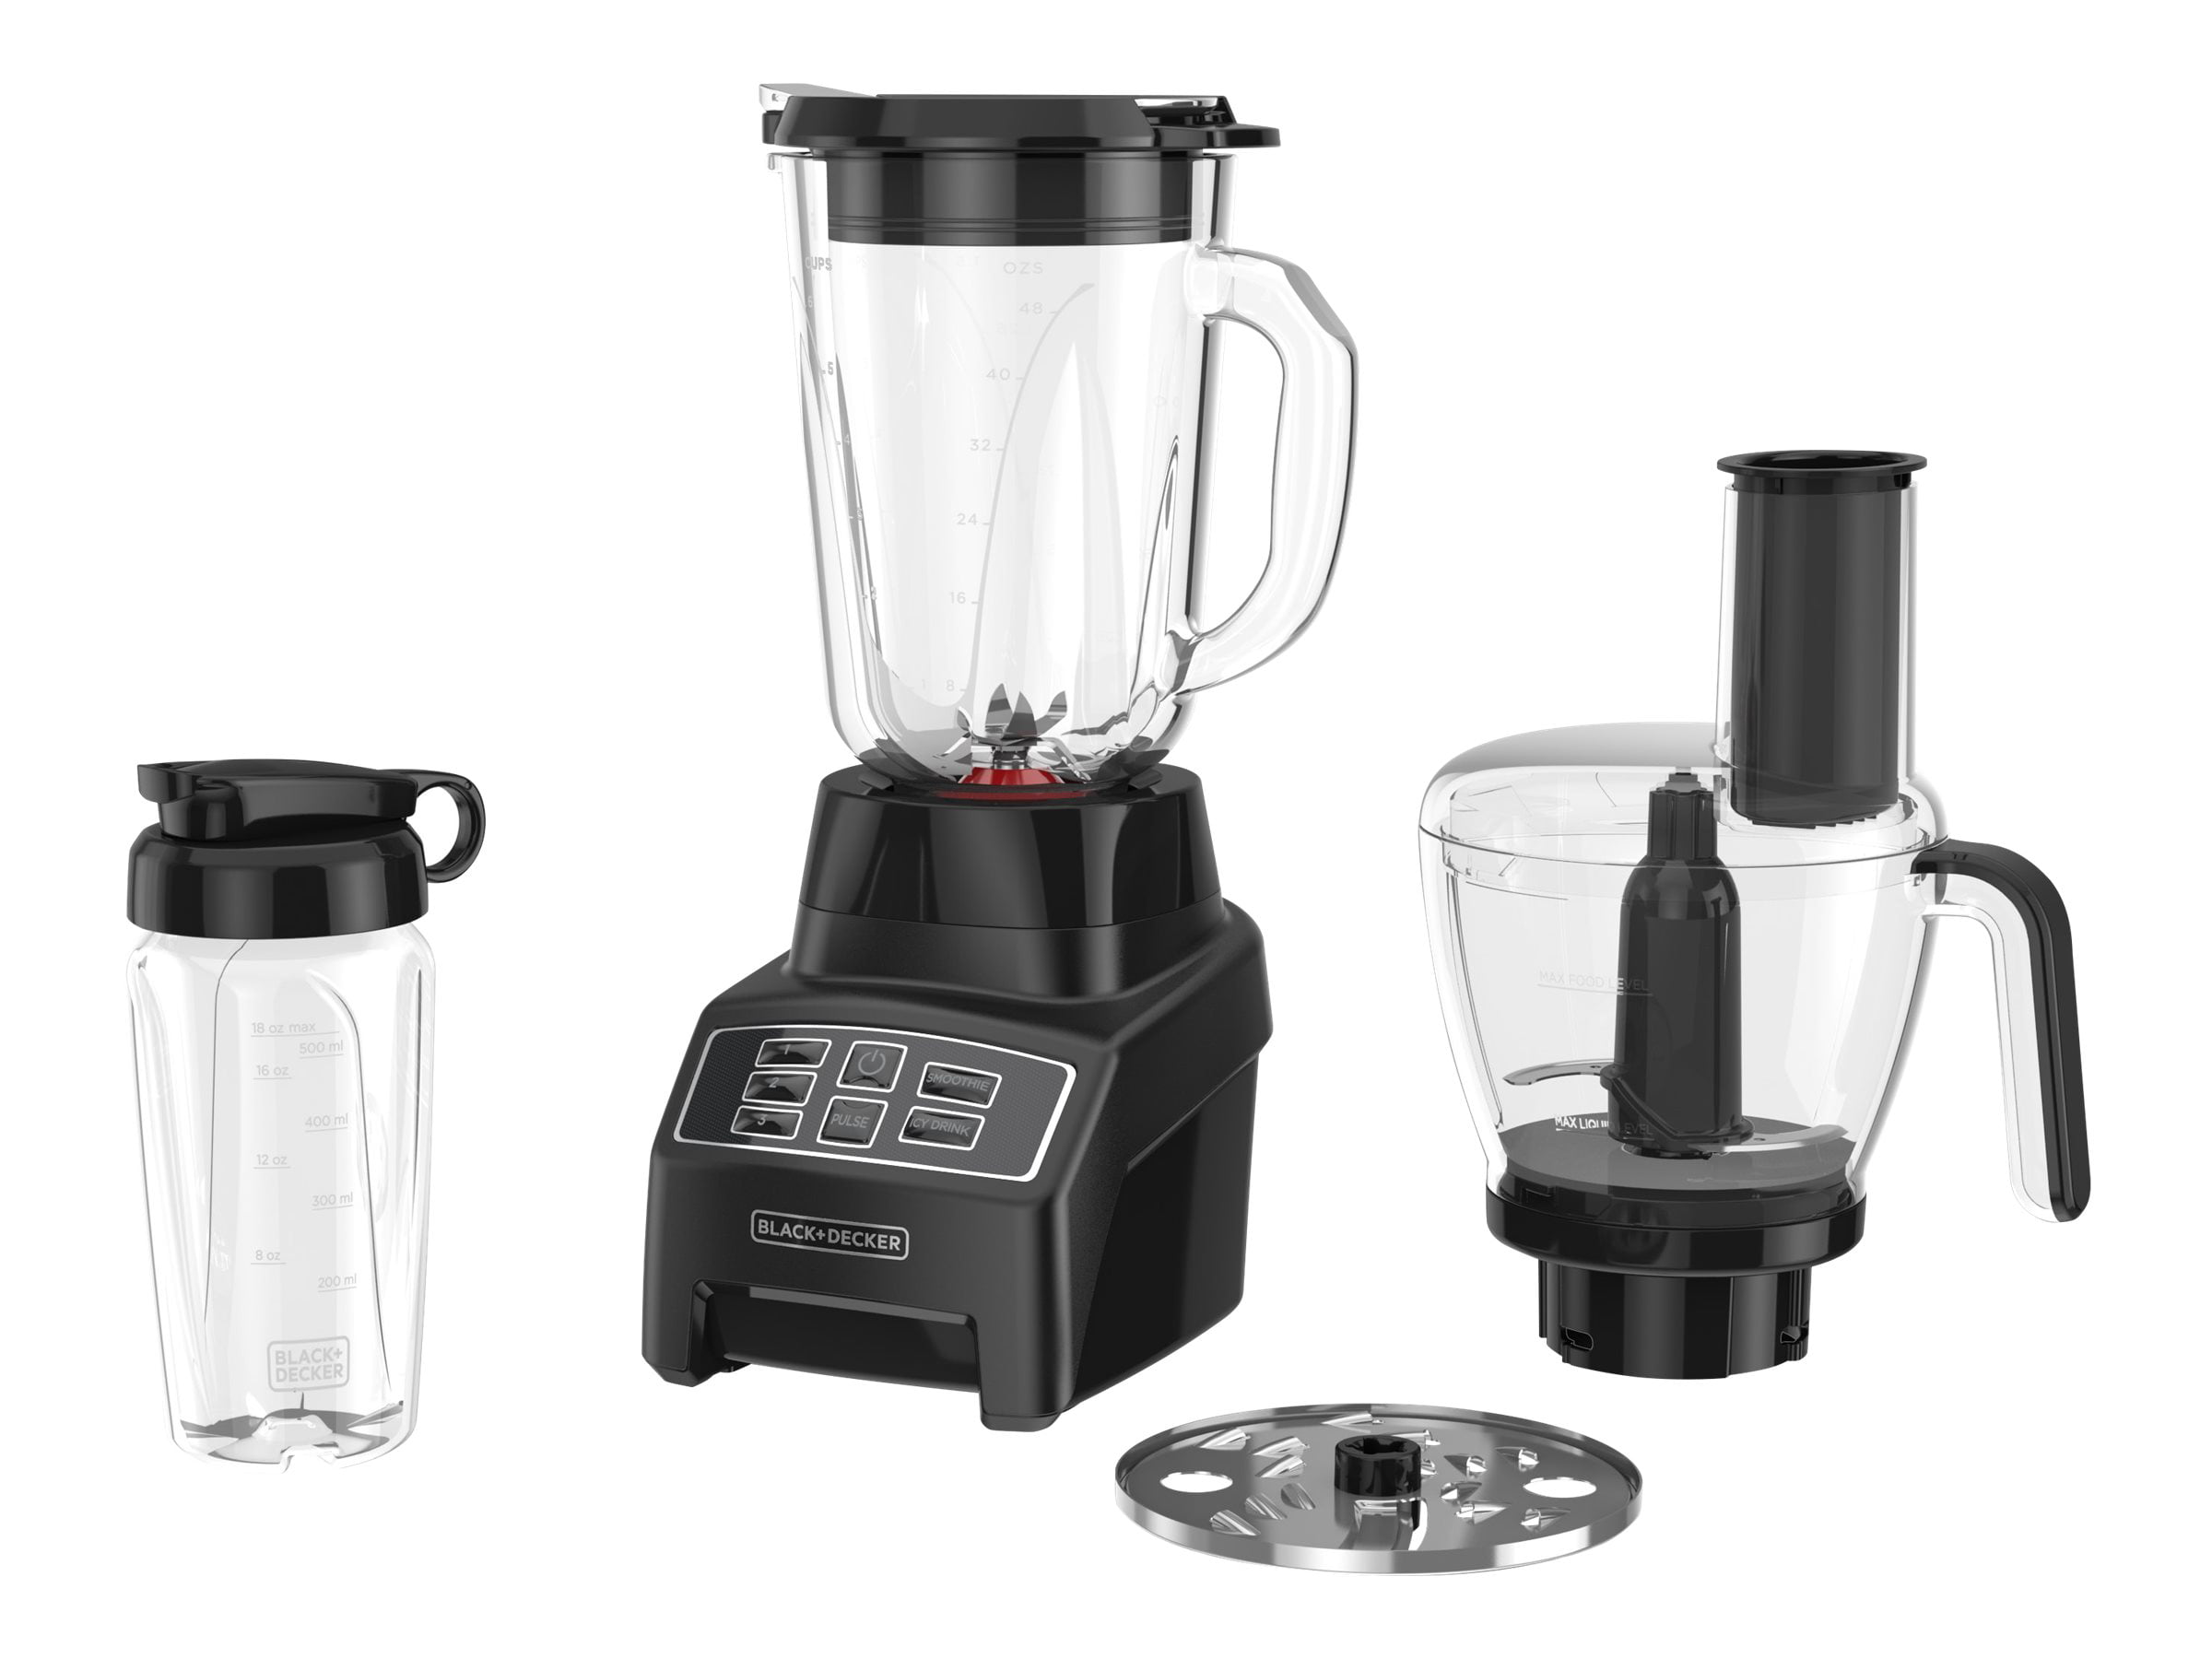 Blender Black + Decker - 400W - 1.5 Liters - With 2 ice crushers - (Price  in fcfa)